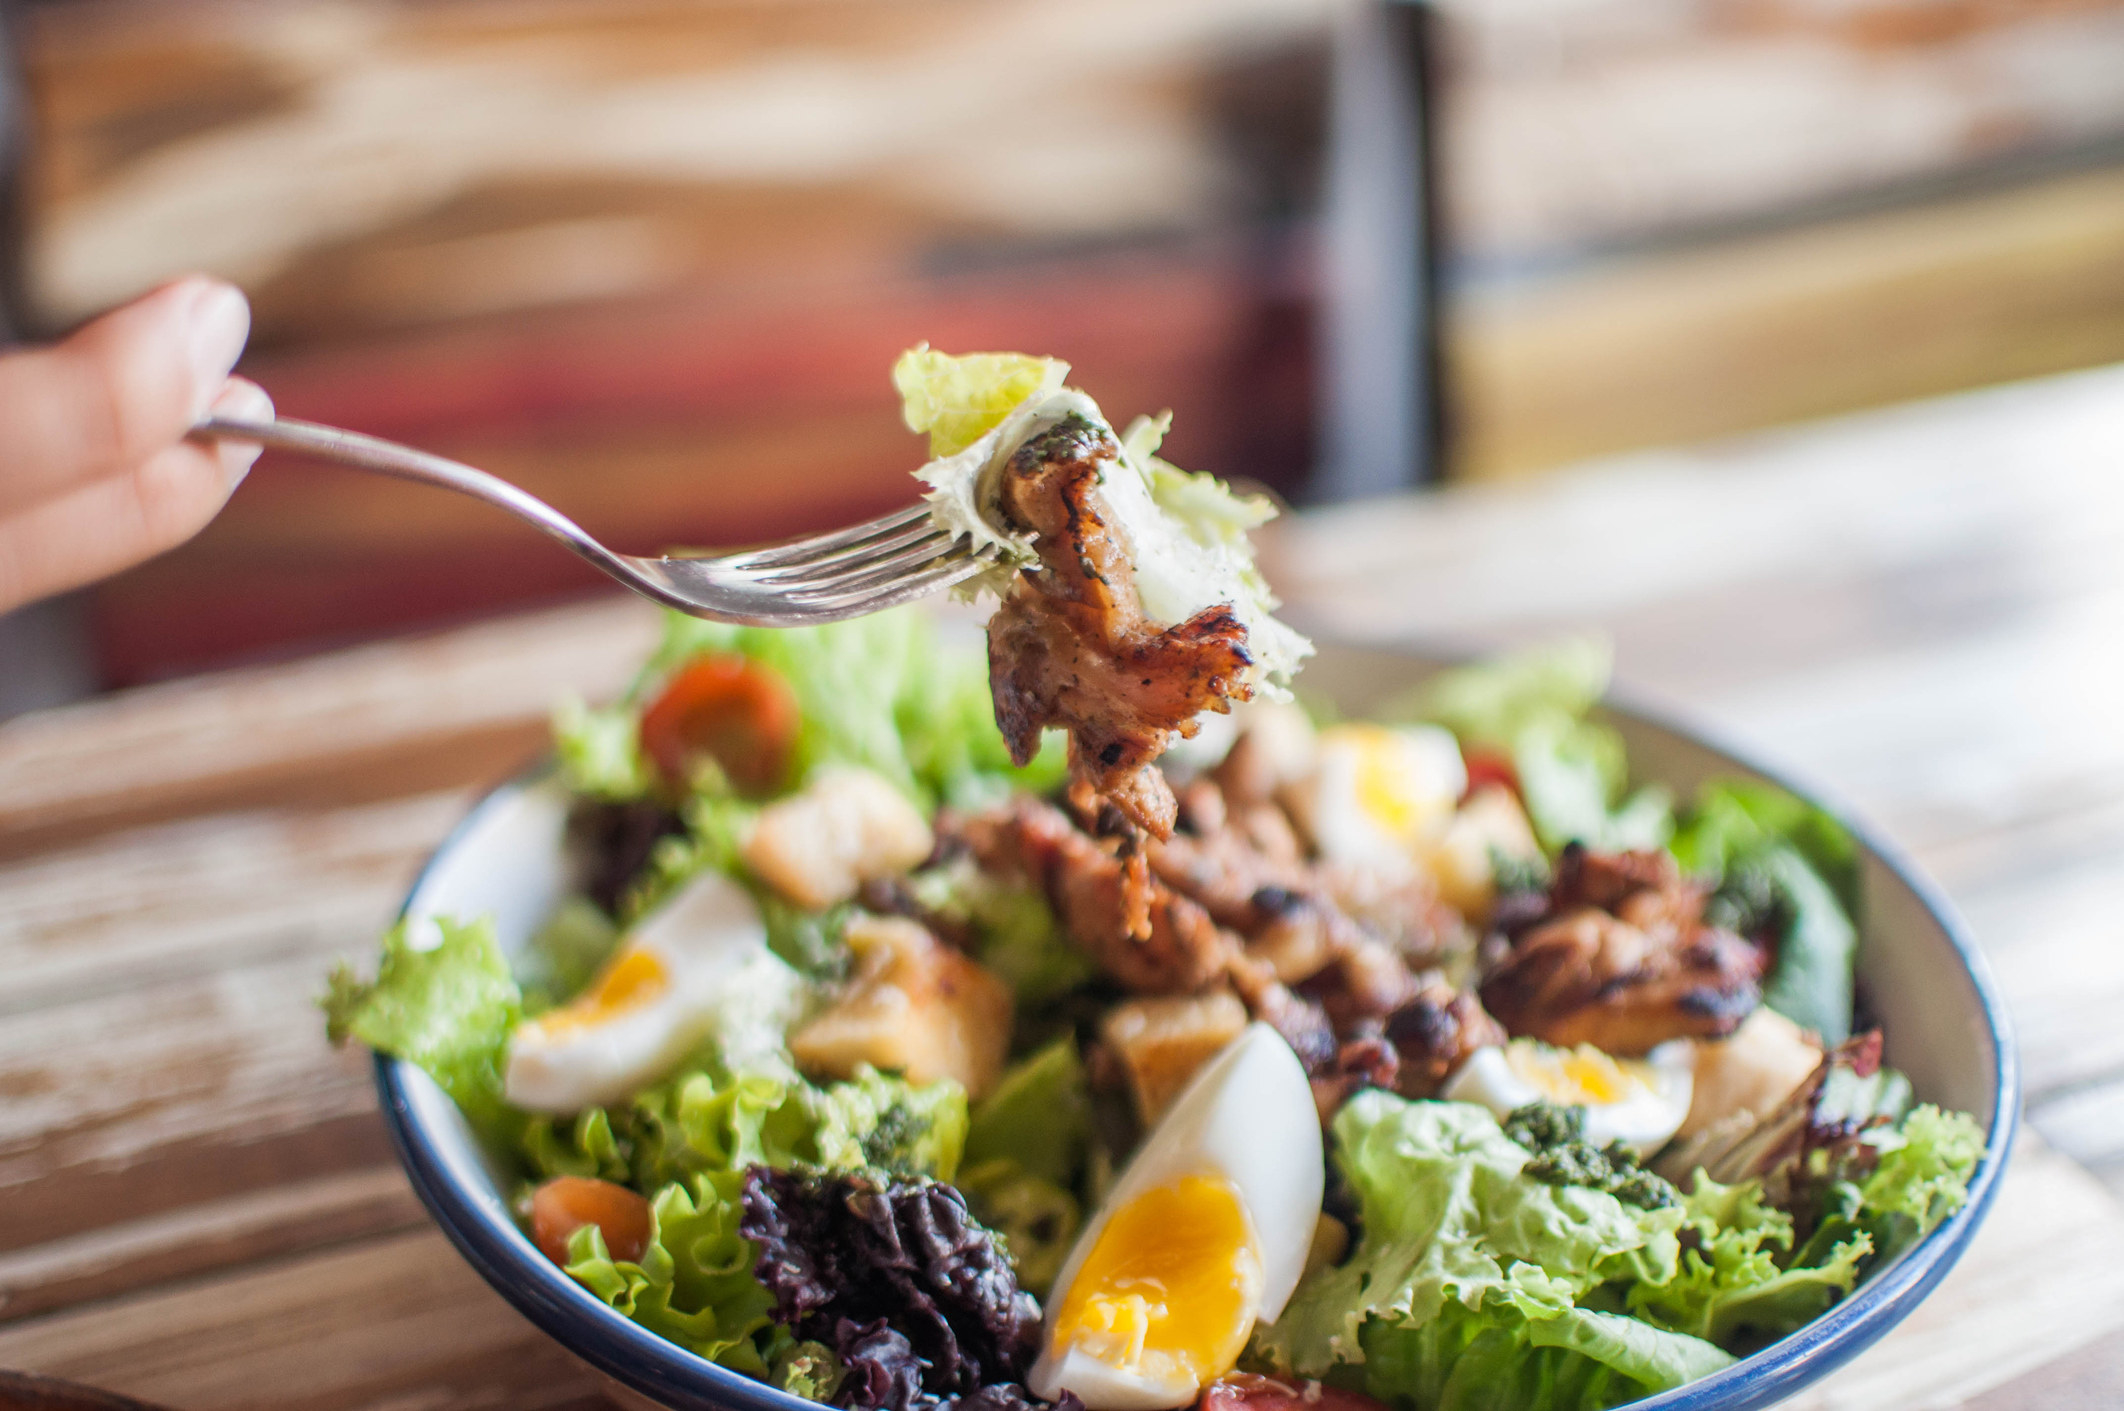 A big fresh salad with chicken, lettuce, and egg